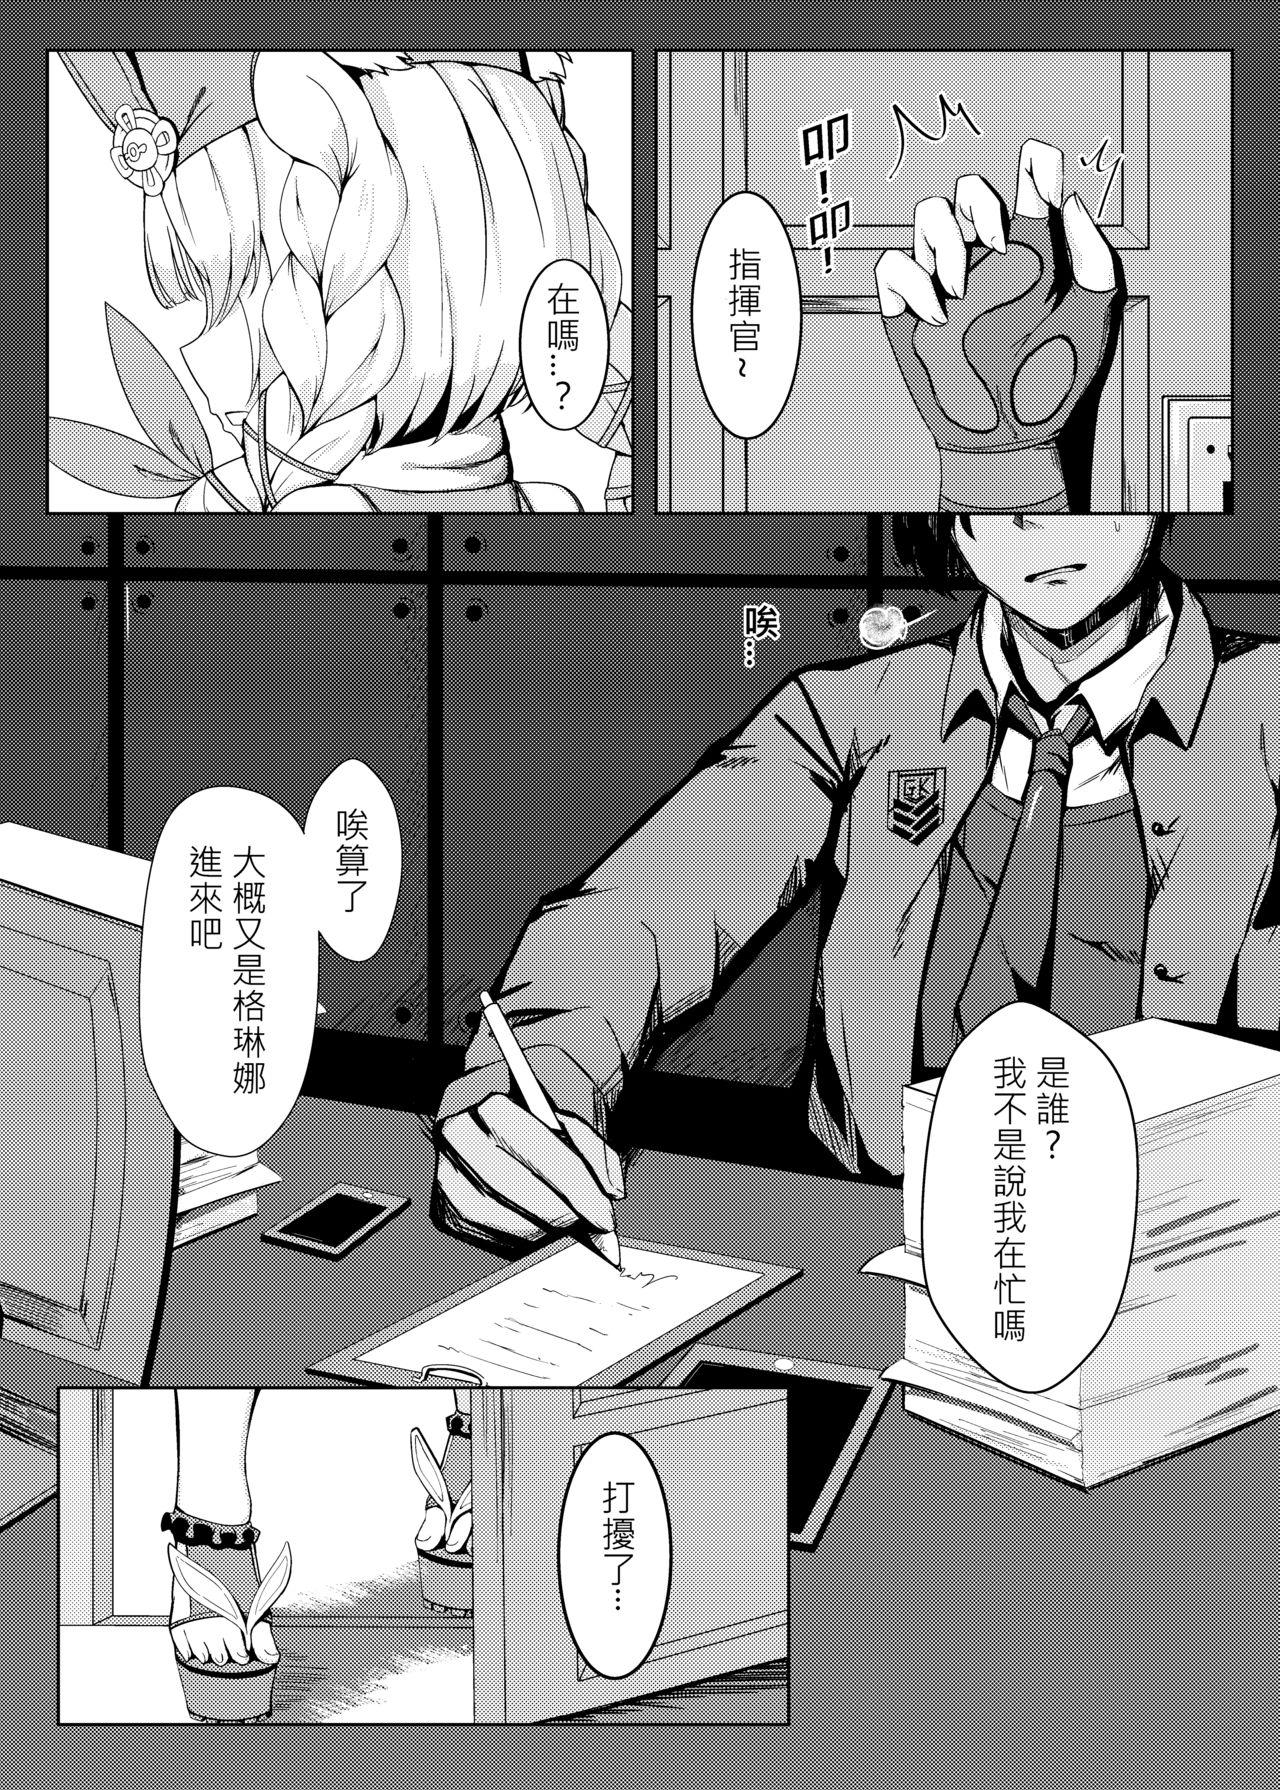 Seduction Porn Rest with SR-3MP - Girls frontline Teen Blowjob - Page 3